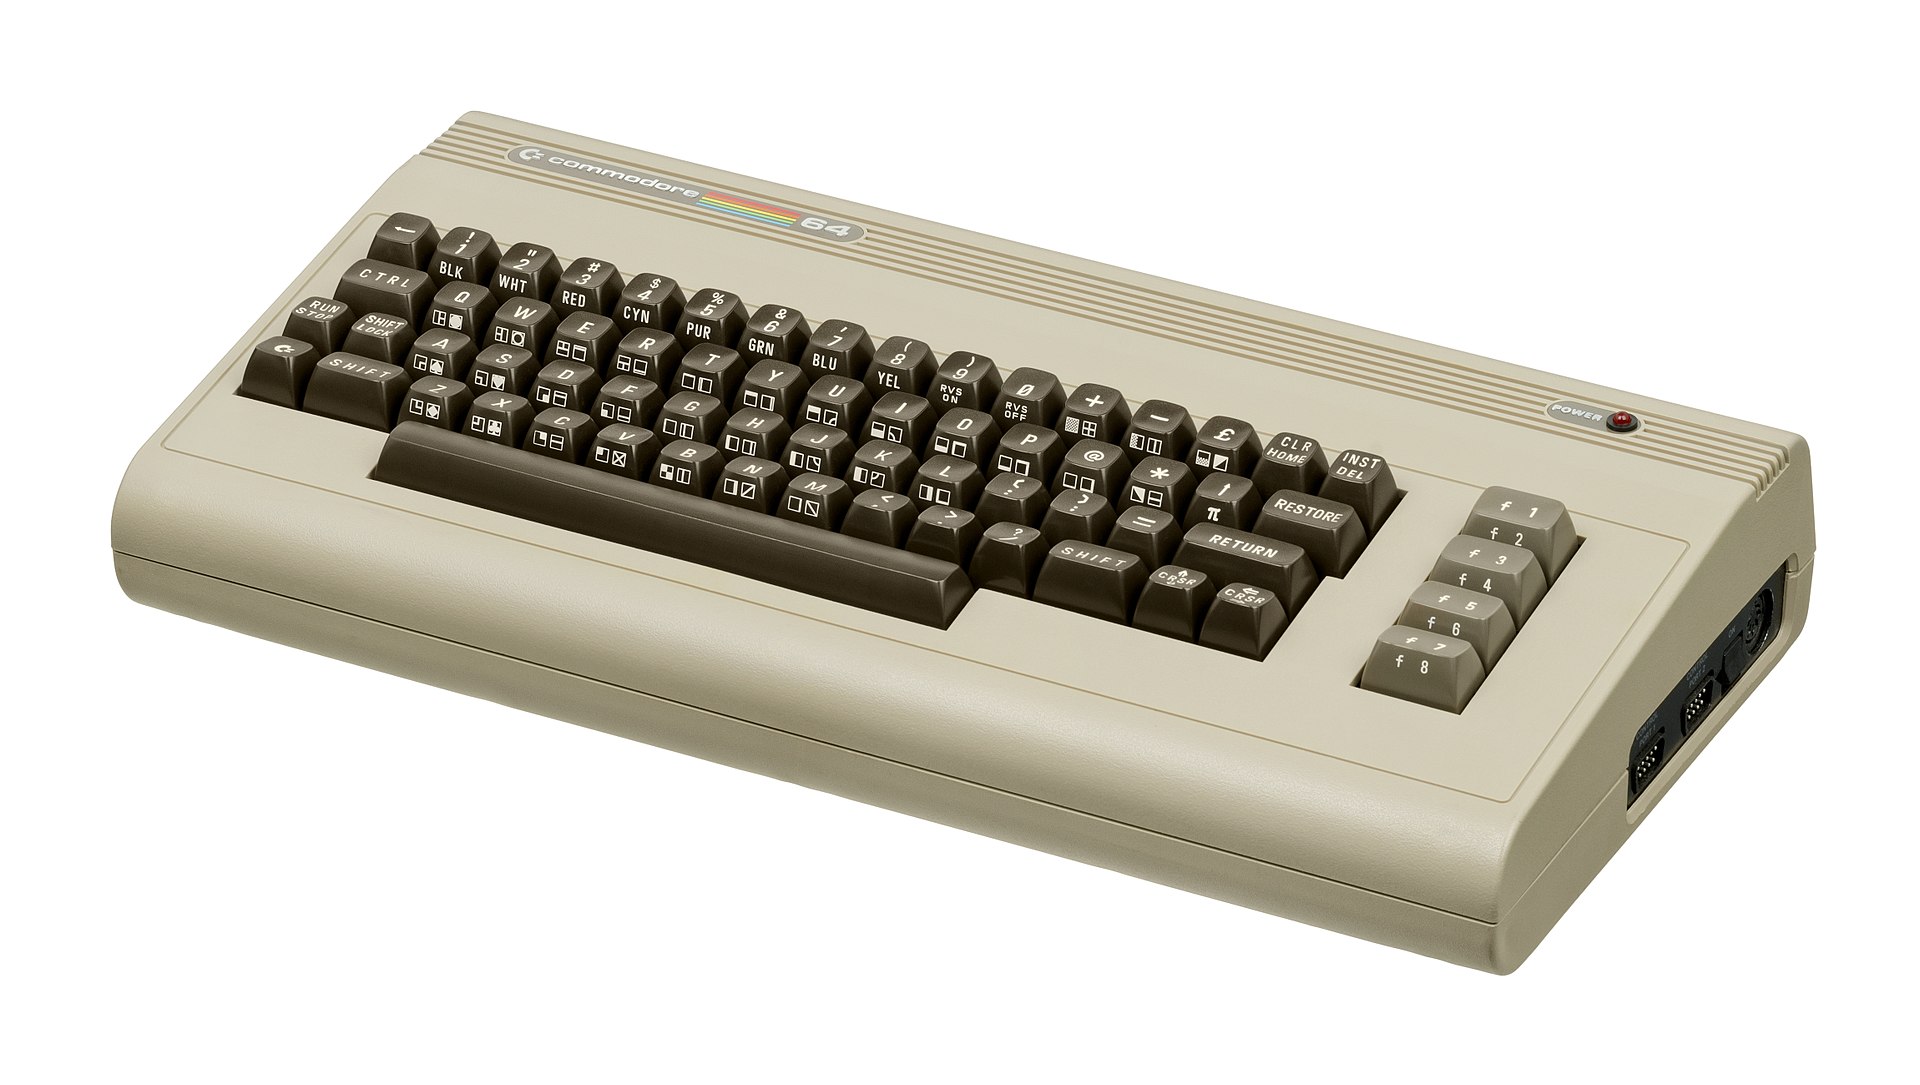 The Commodore 64 changed the life of the Krall brothers forever.